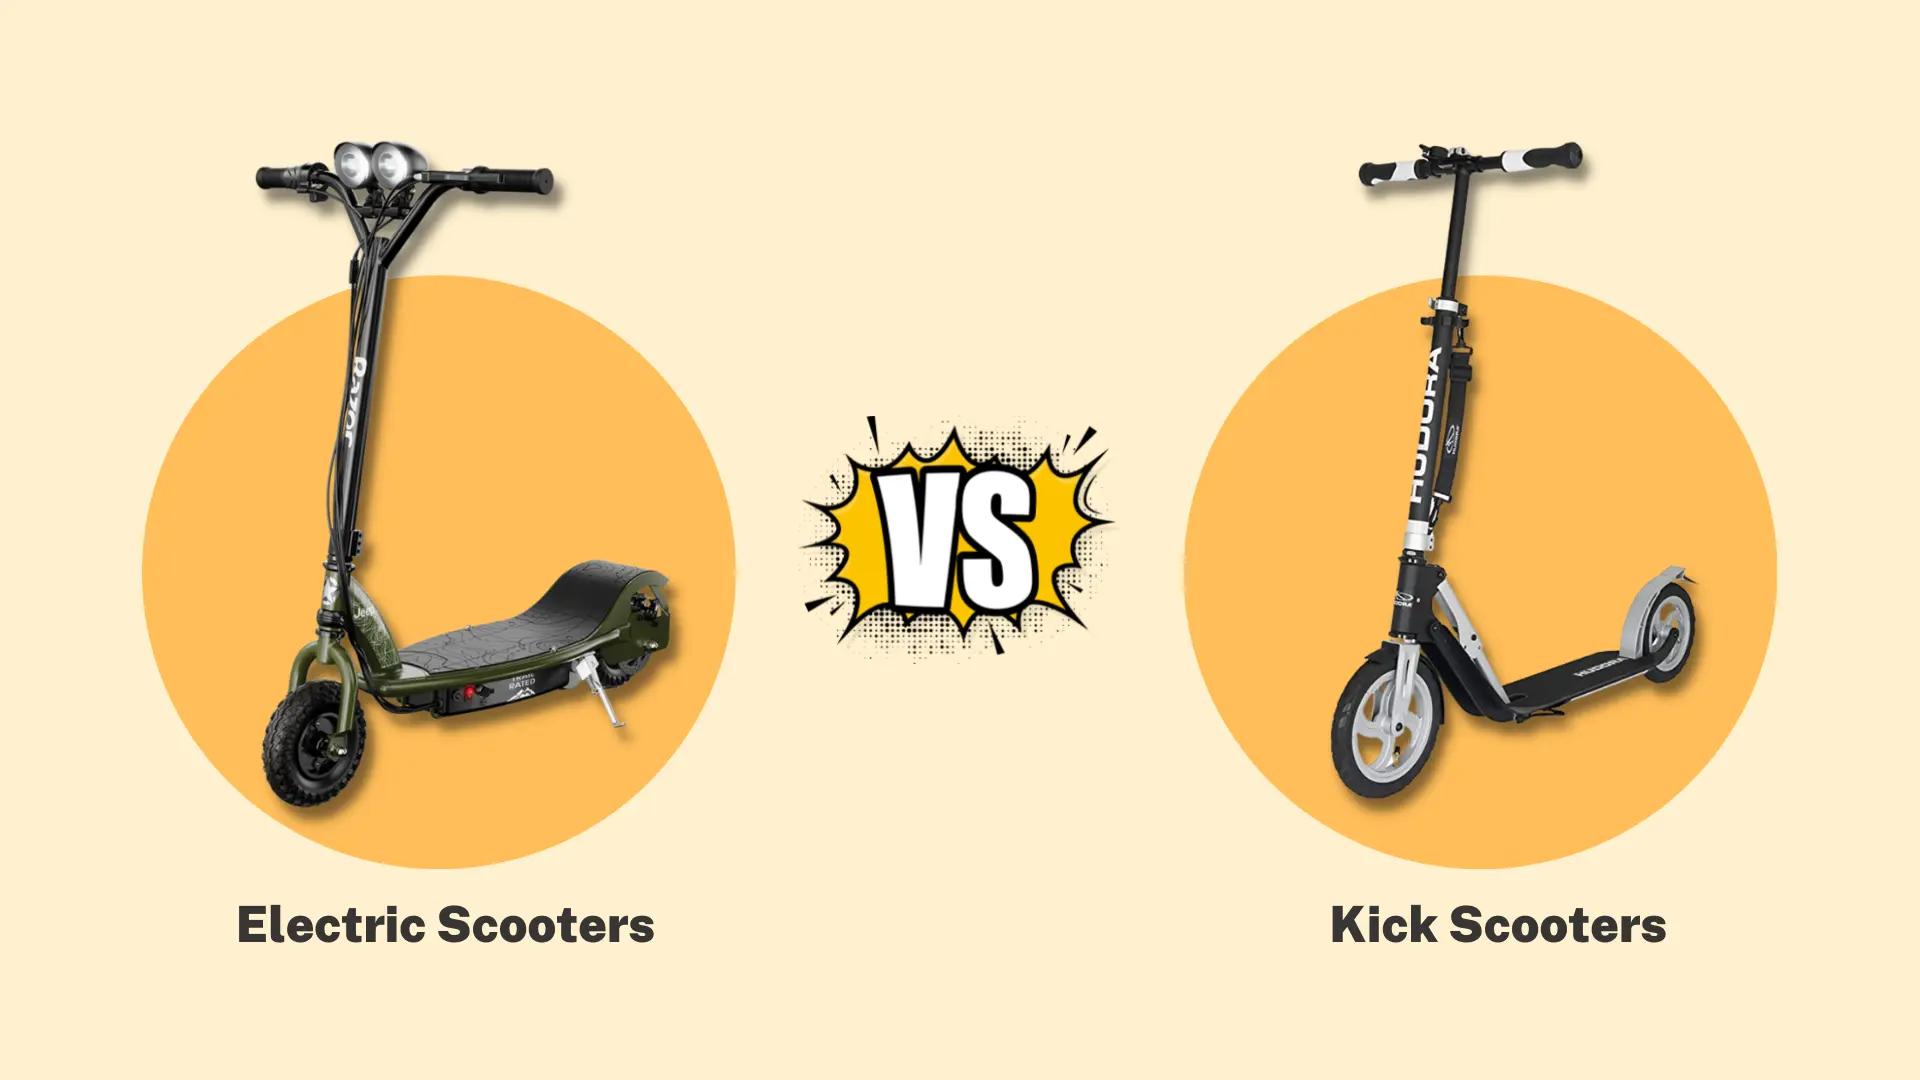 Electric Scooters vs Kick Scooters